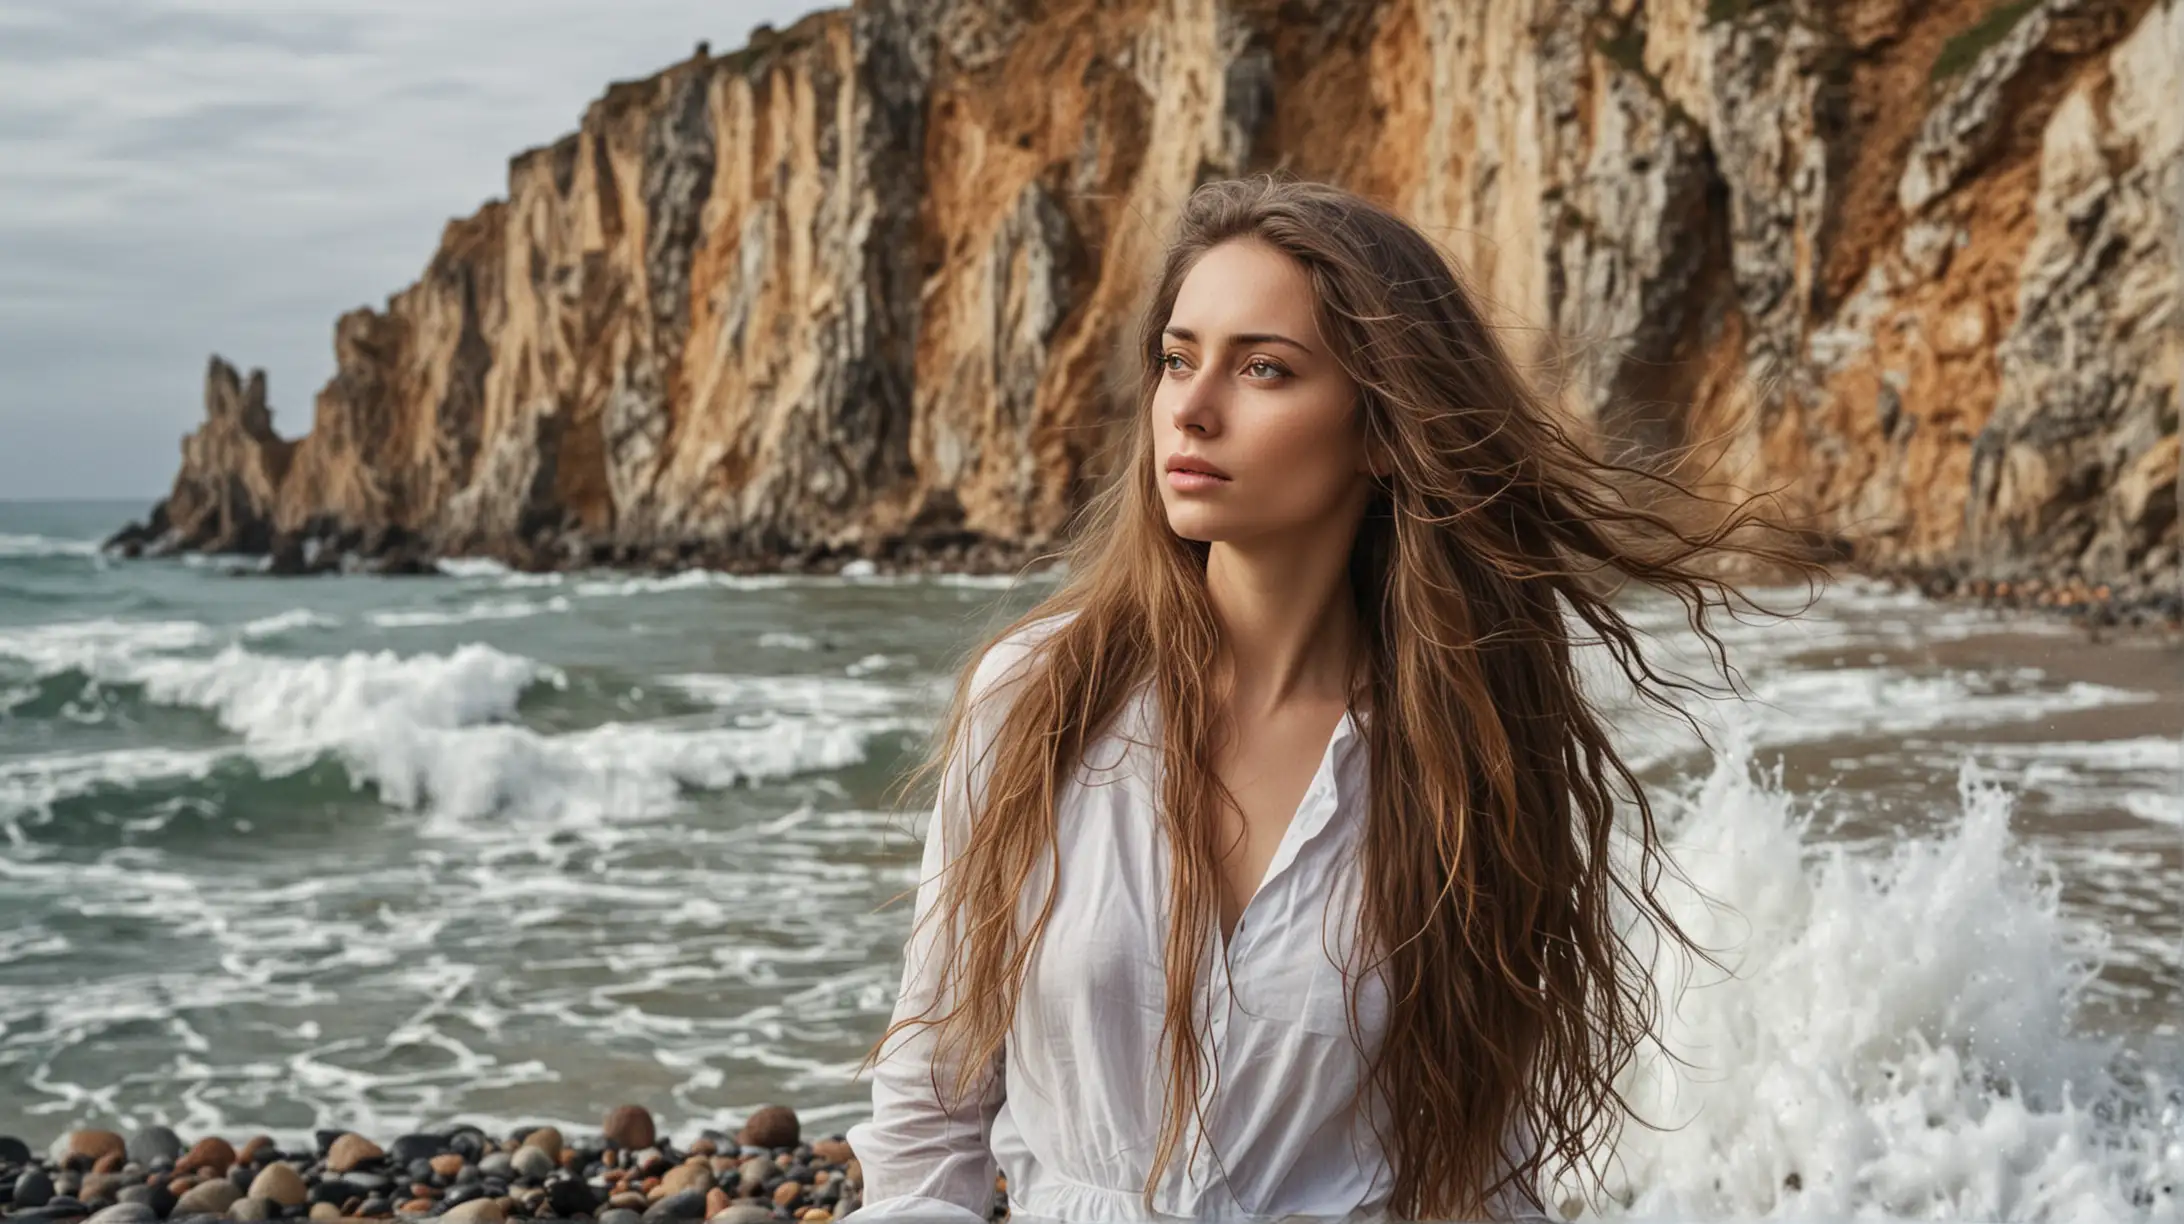 Serene Woman with Flowing Hair by Rocky Seashore